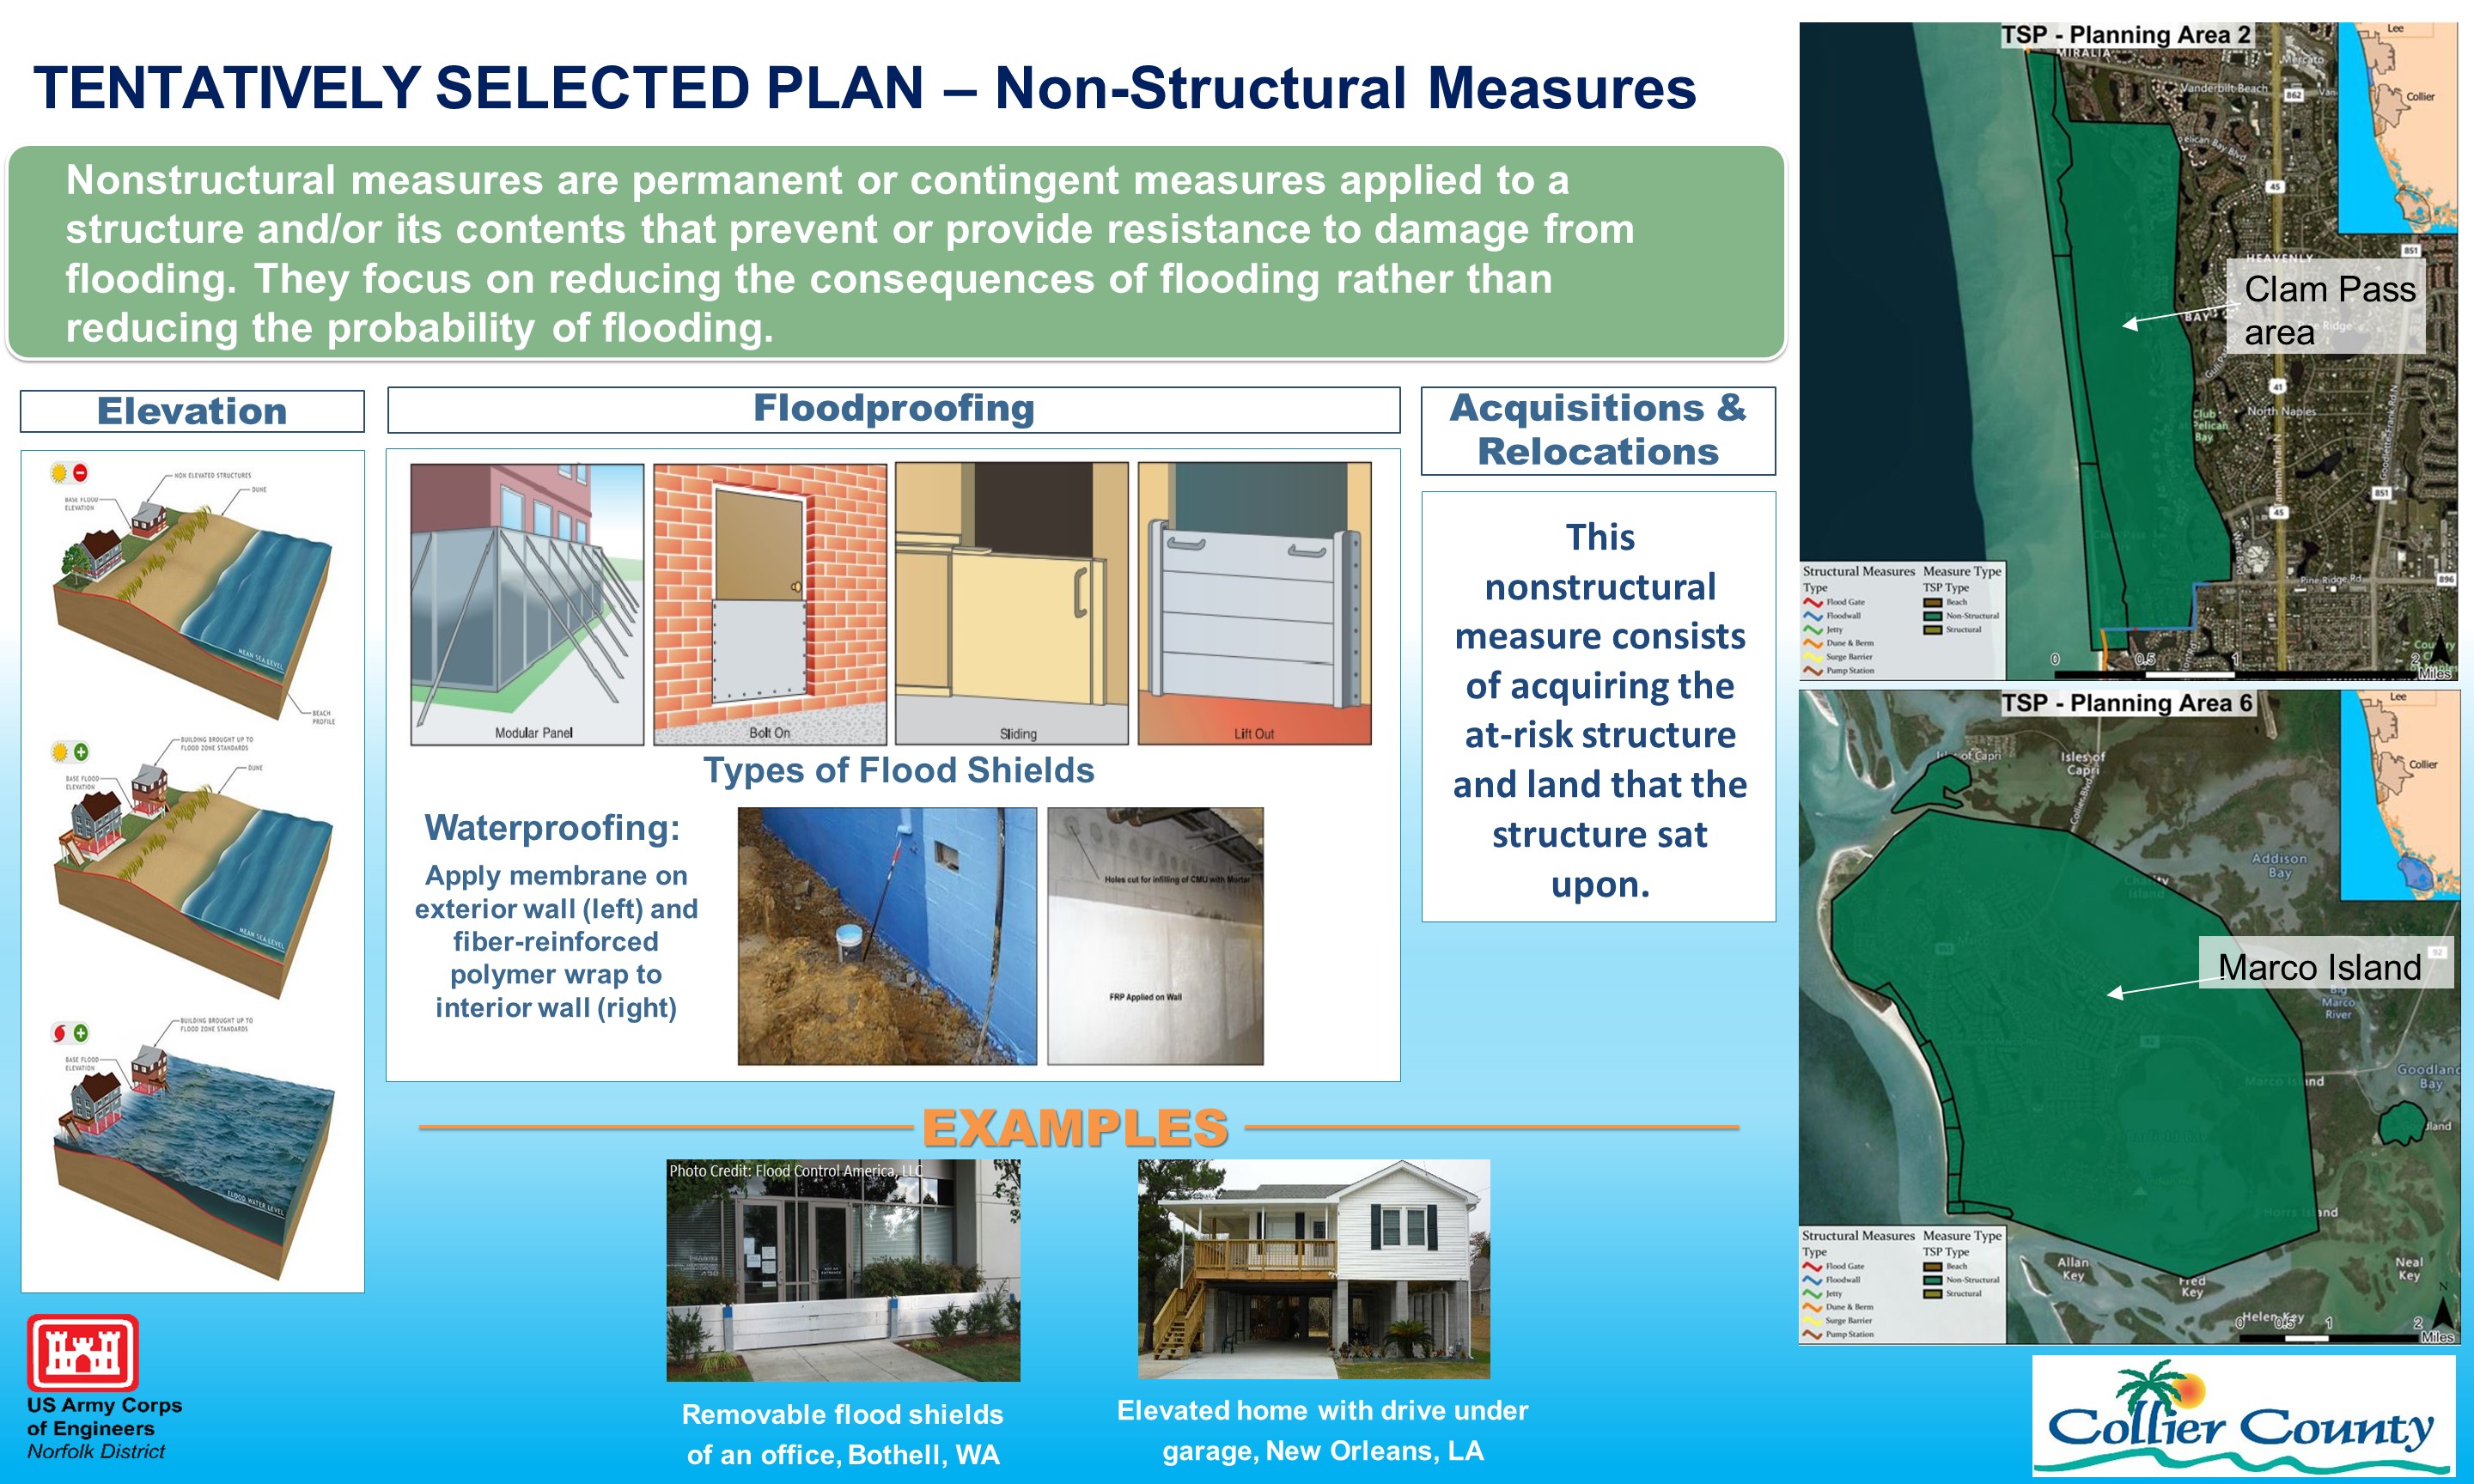 Collier County CSRM Tentatively Selected Plan Non-Structural Measures